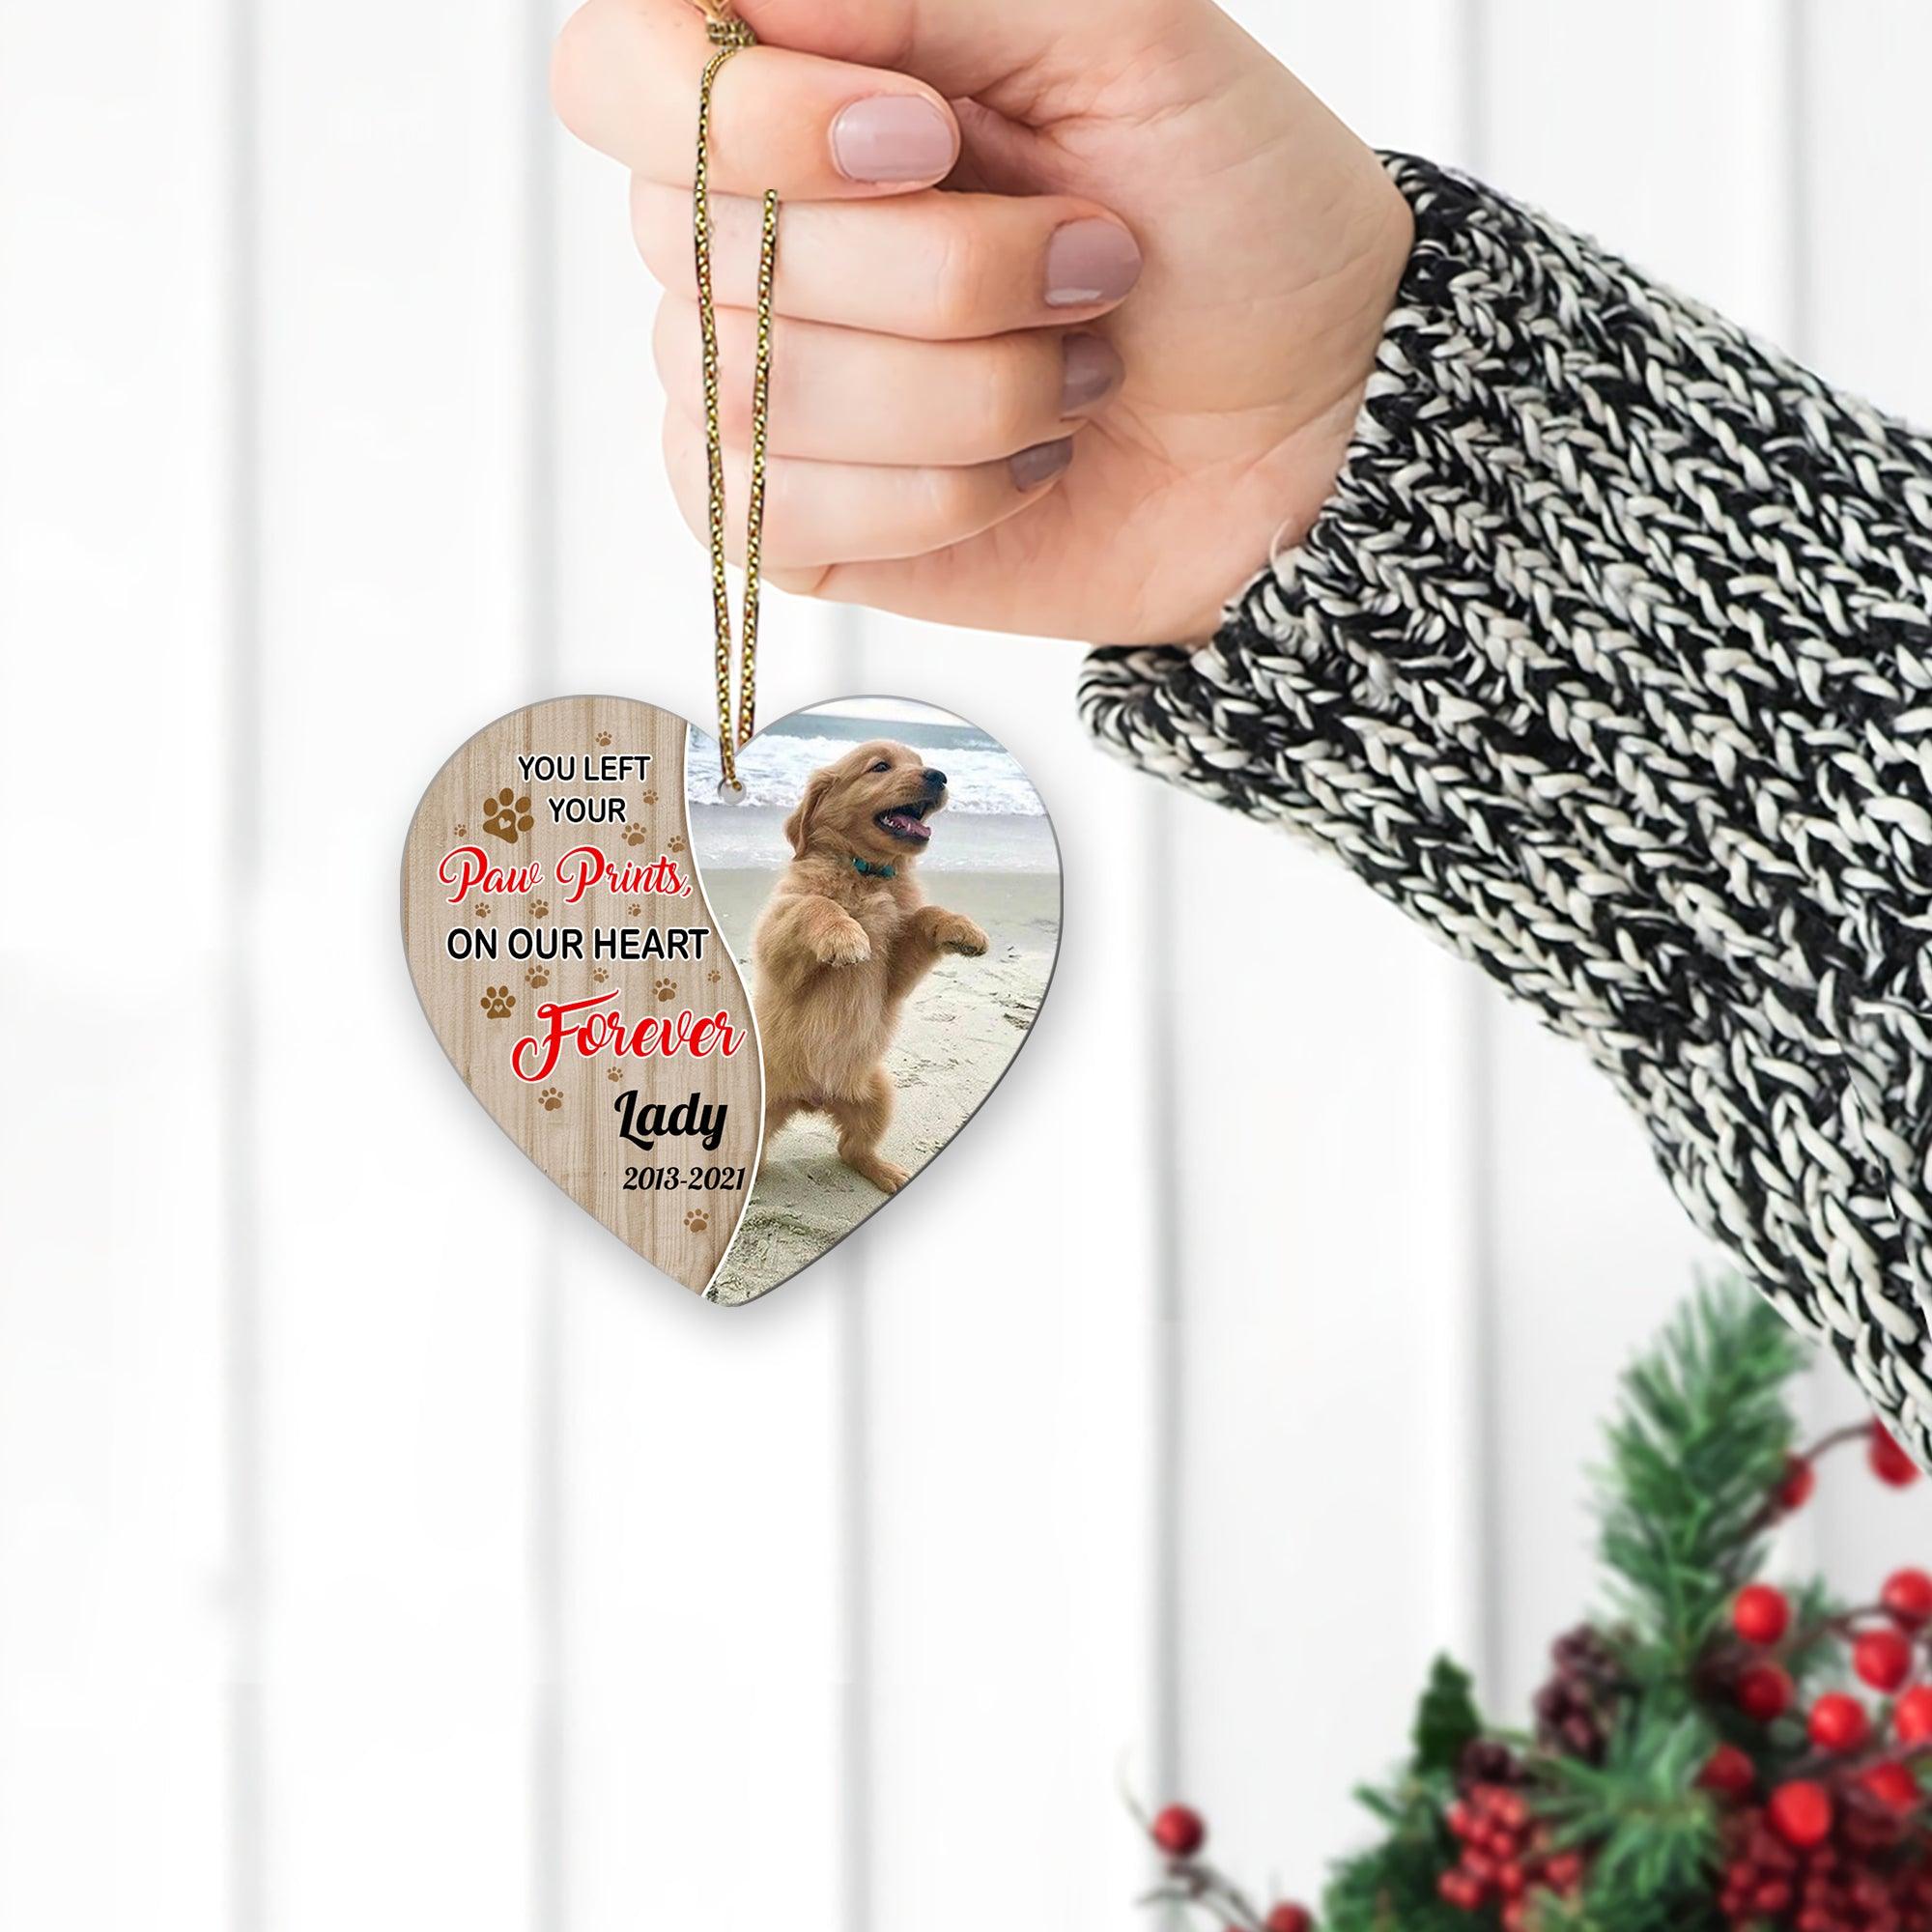 Forever in My Heart Personalized Pet Memorial Ornament – Moon Rock Prints